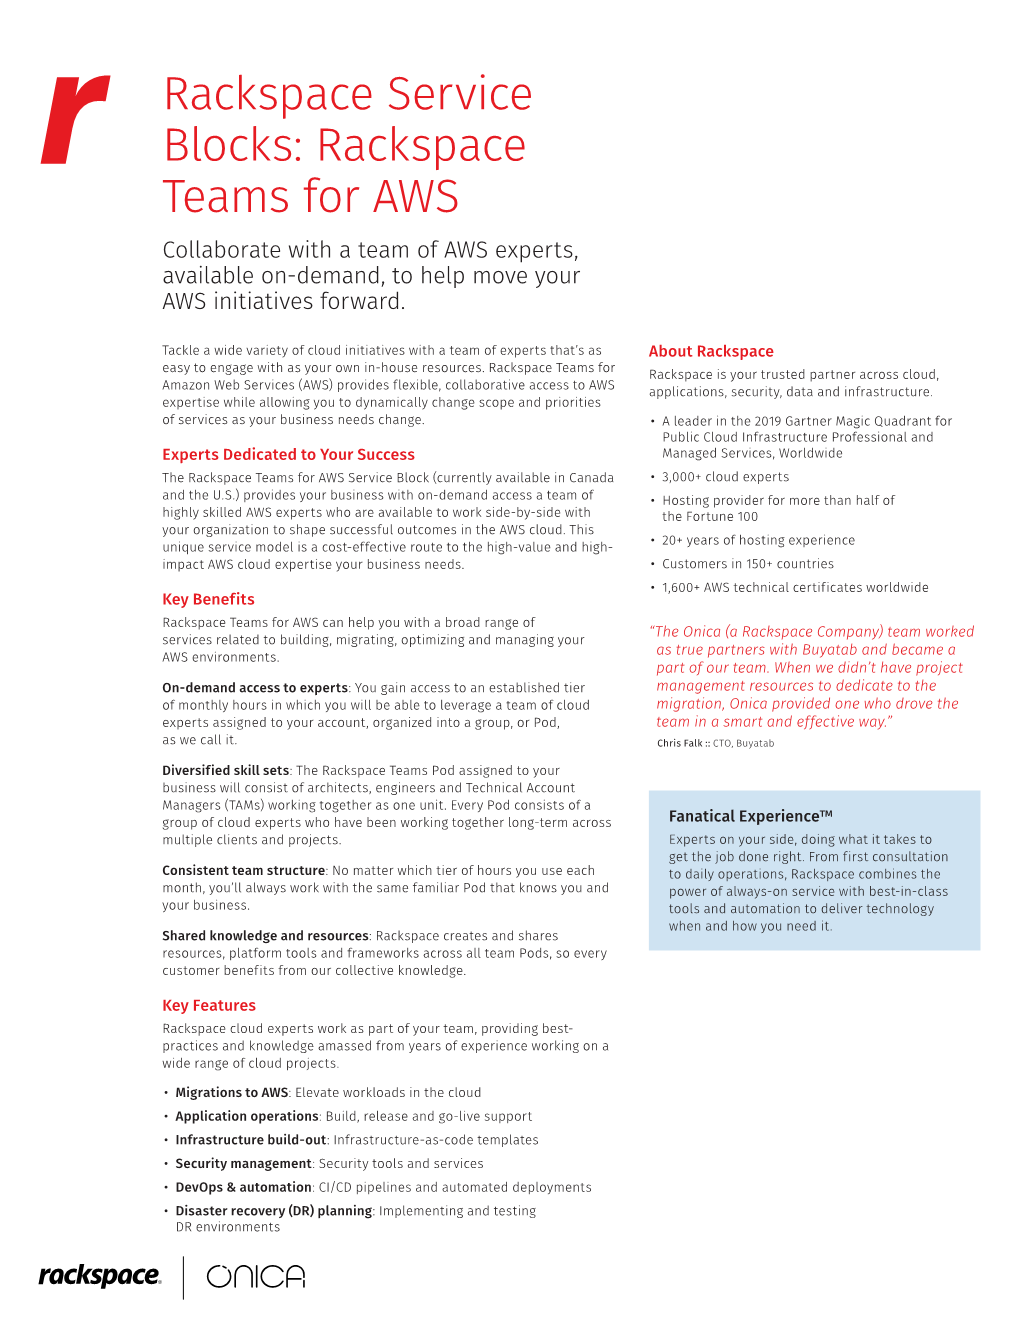 Rackspace Service Blocks: Rackspace Teams for AWS Collaborate with a Team of AWS Experts, Available On-Demand, to Help Move Your AWS Initiatives Forward